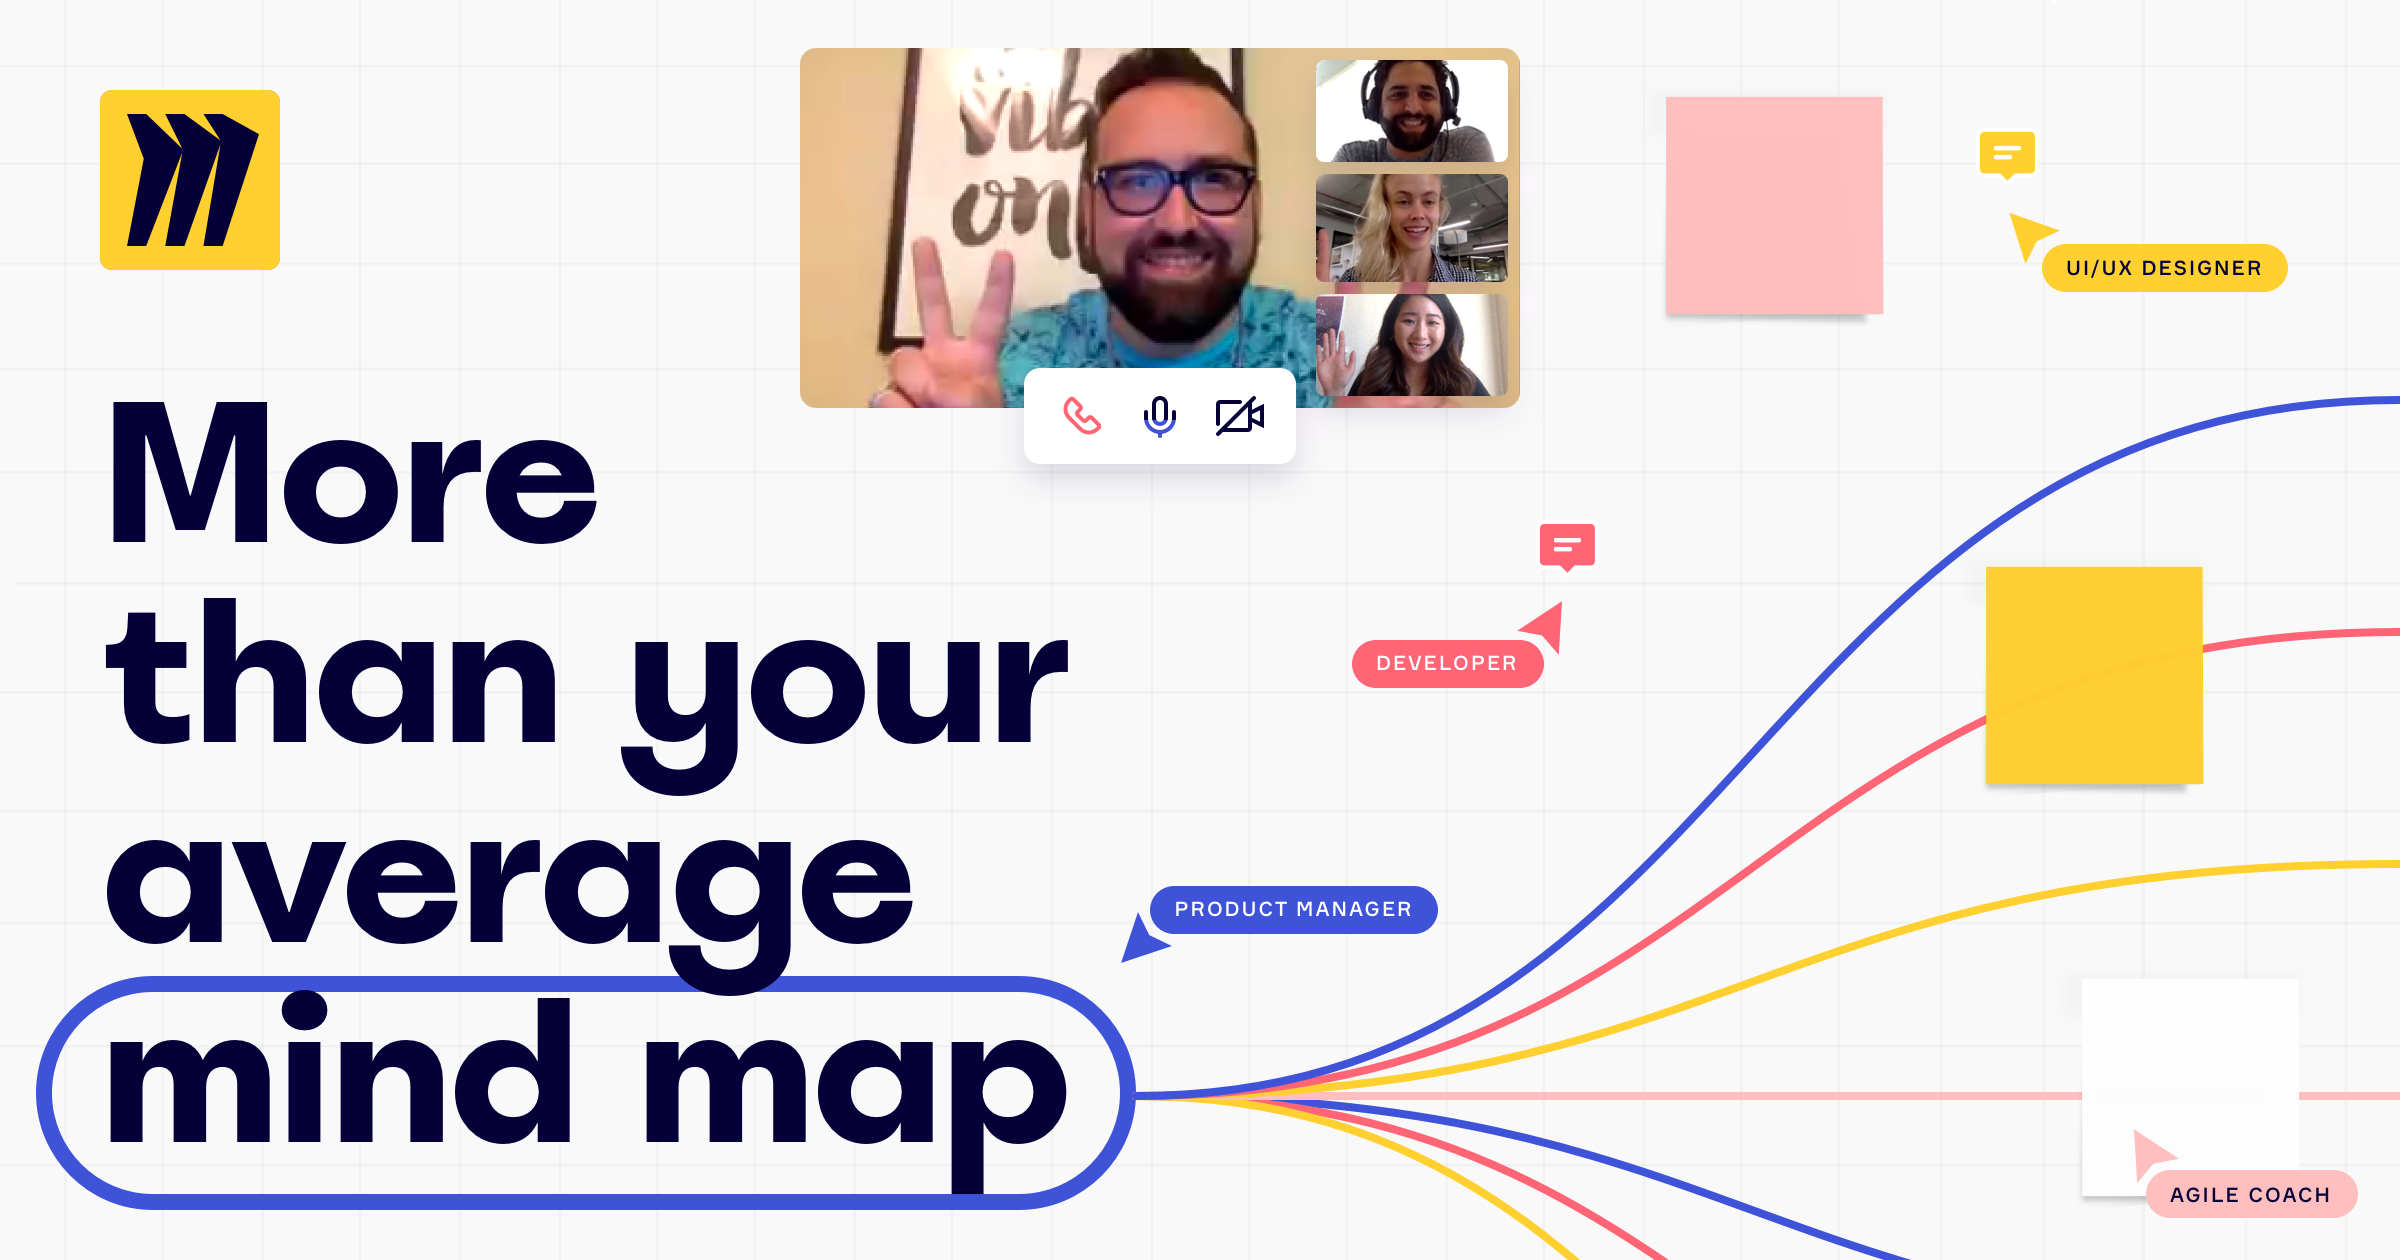 2019 q3 campaign for mindmap twitter facebook 01